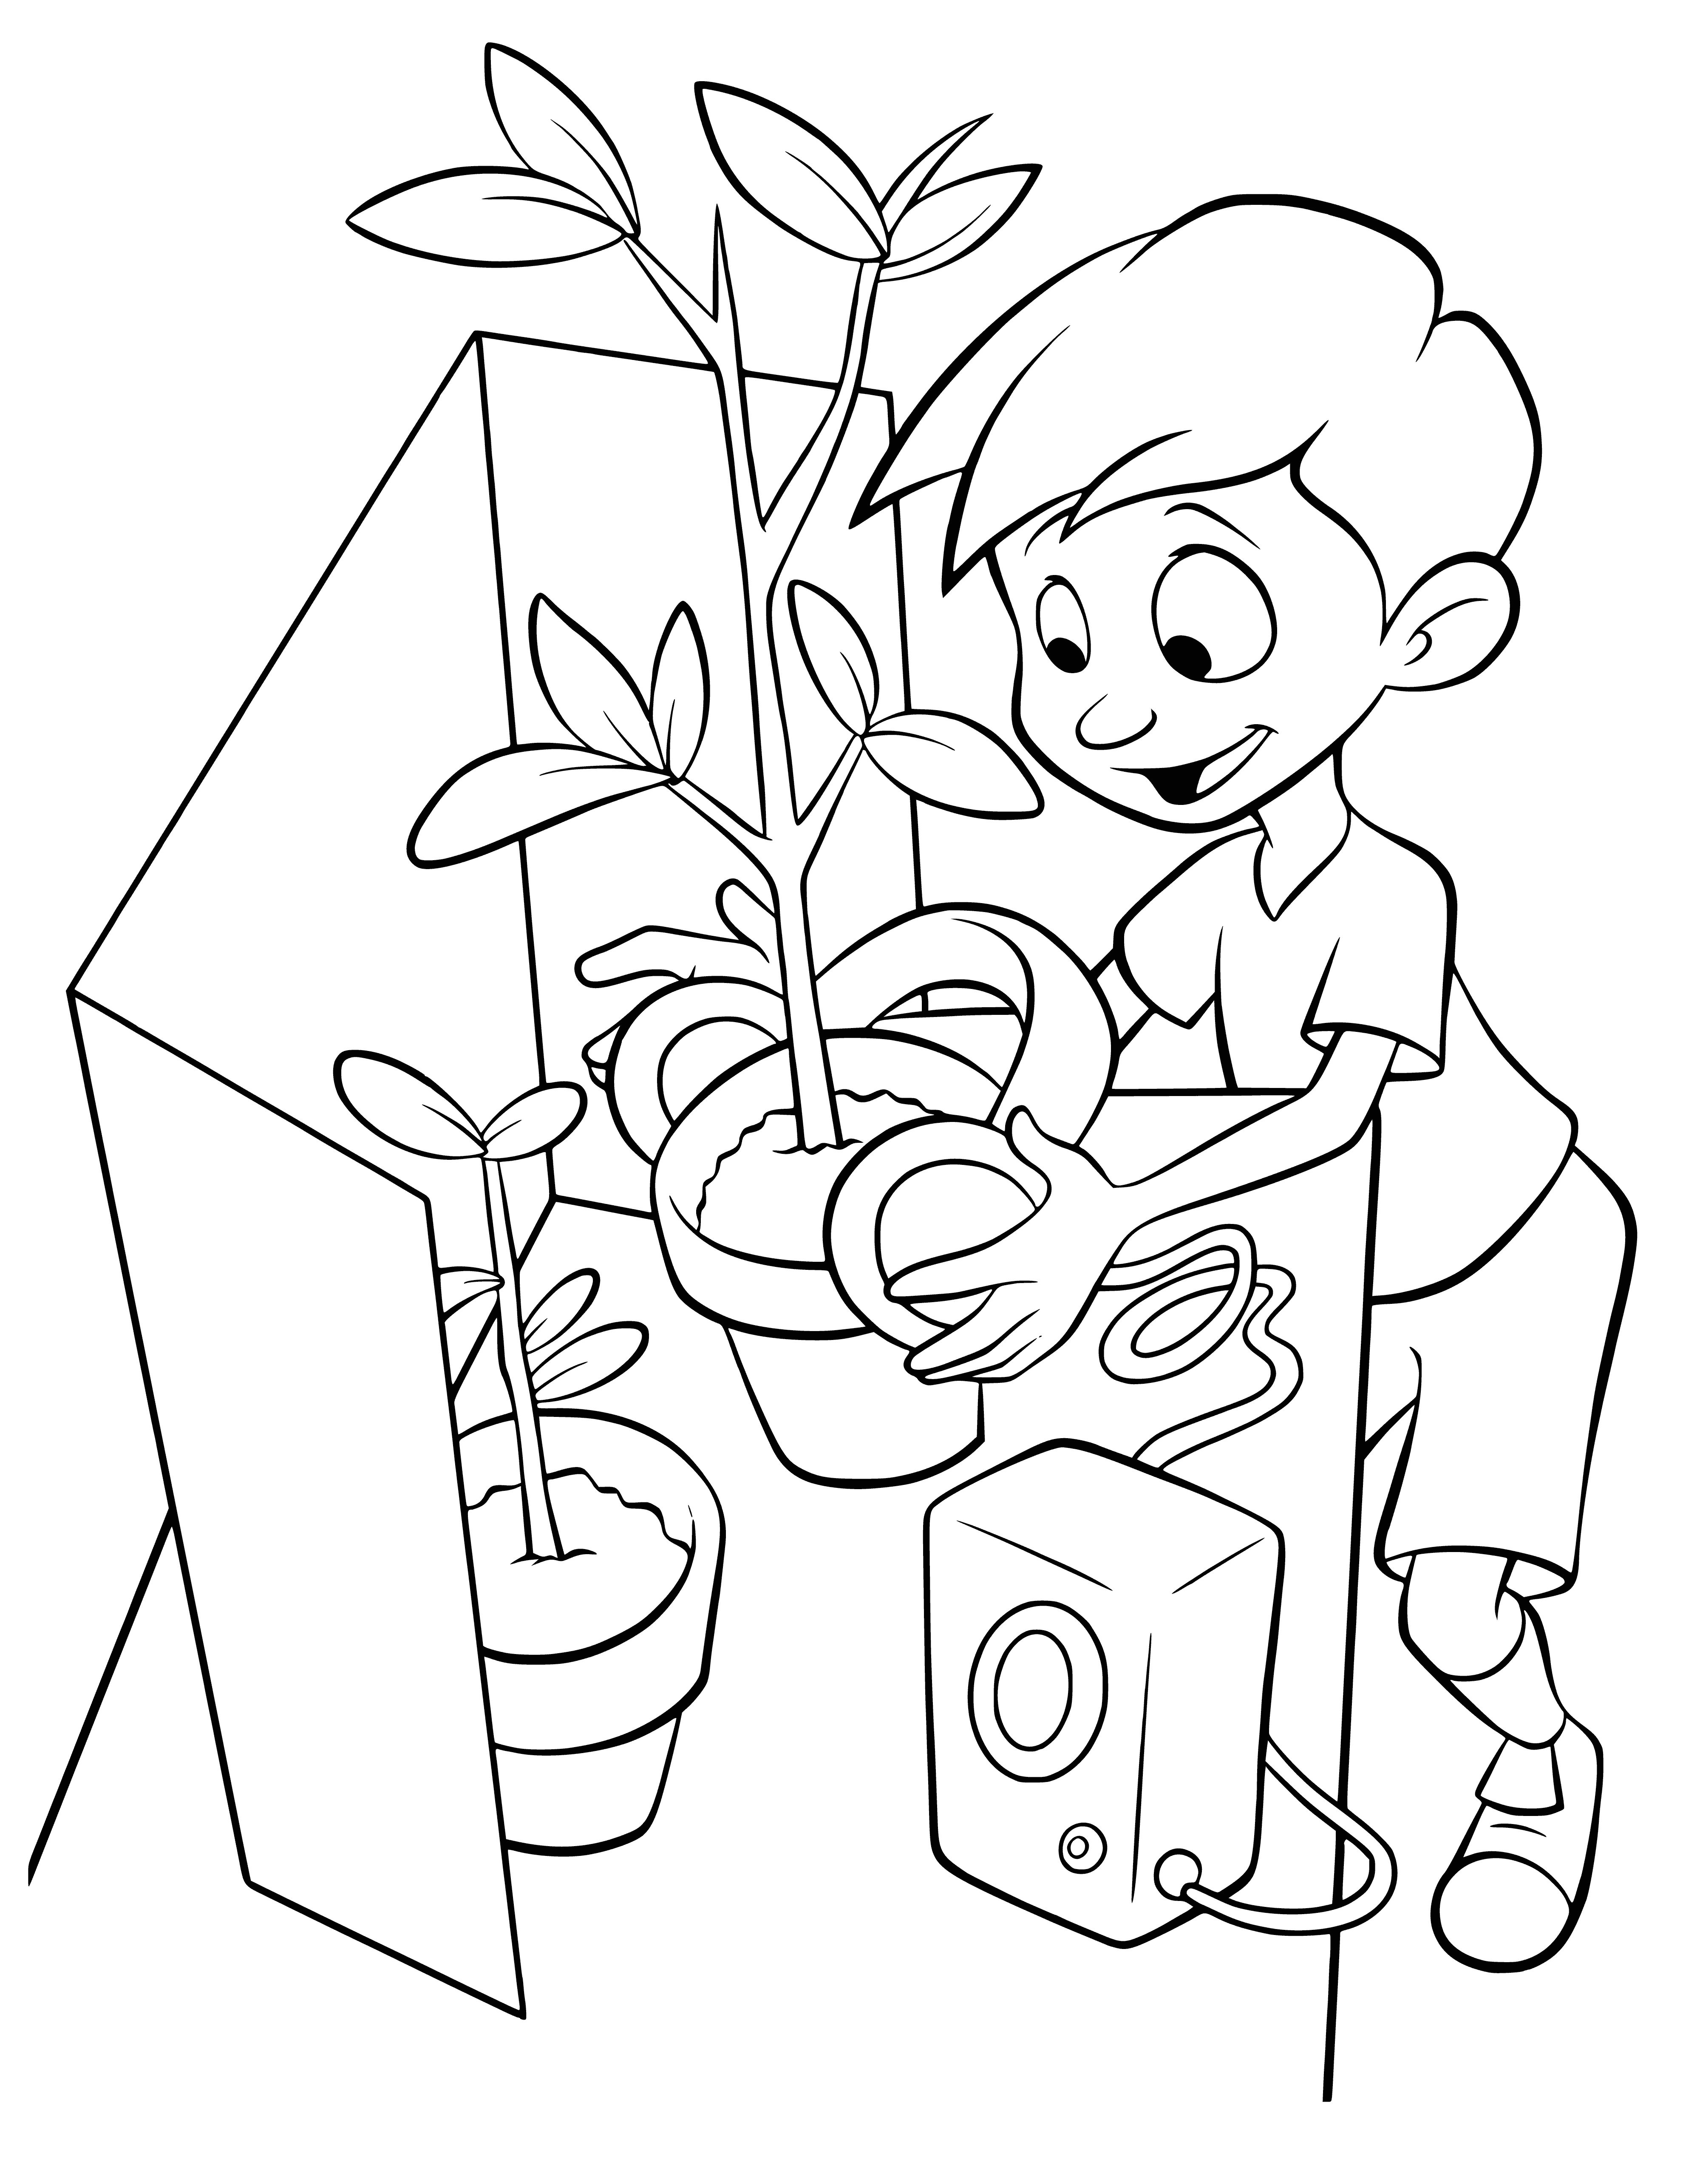 Do flowers love music? coloring page